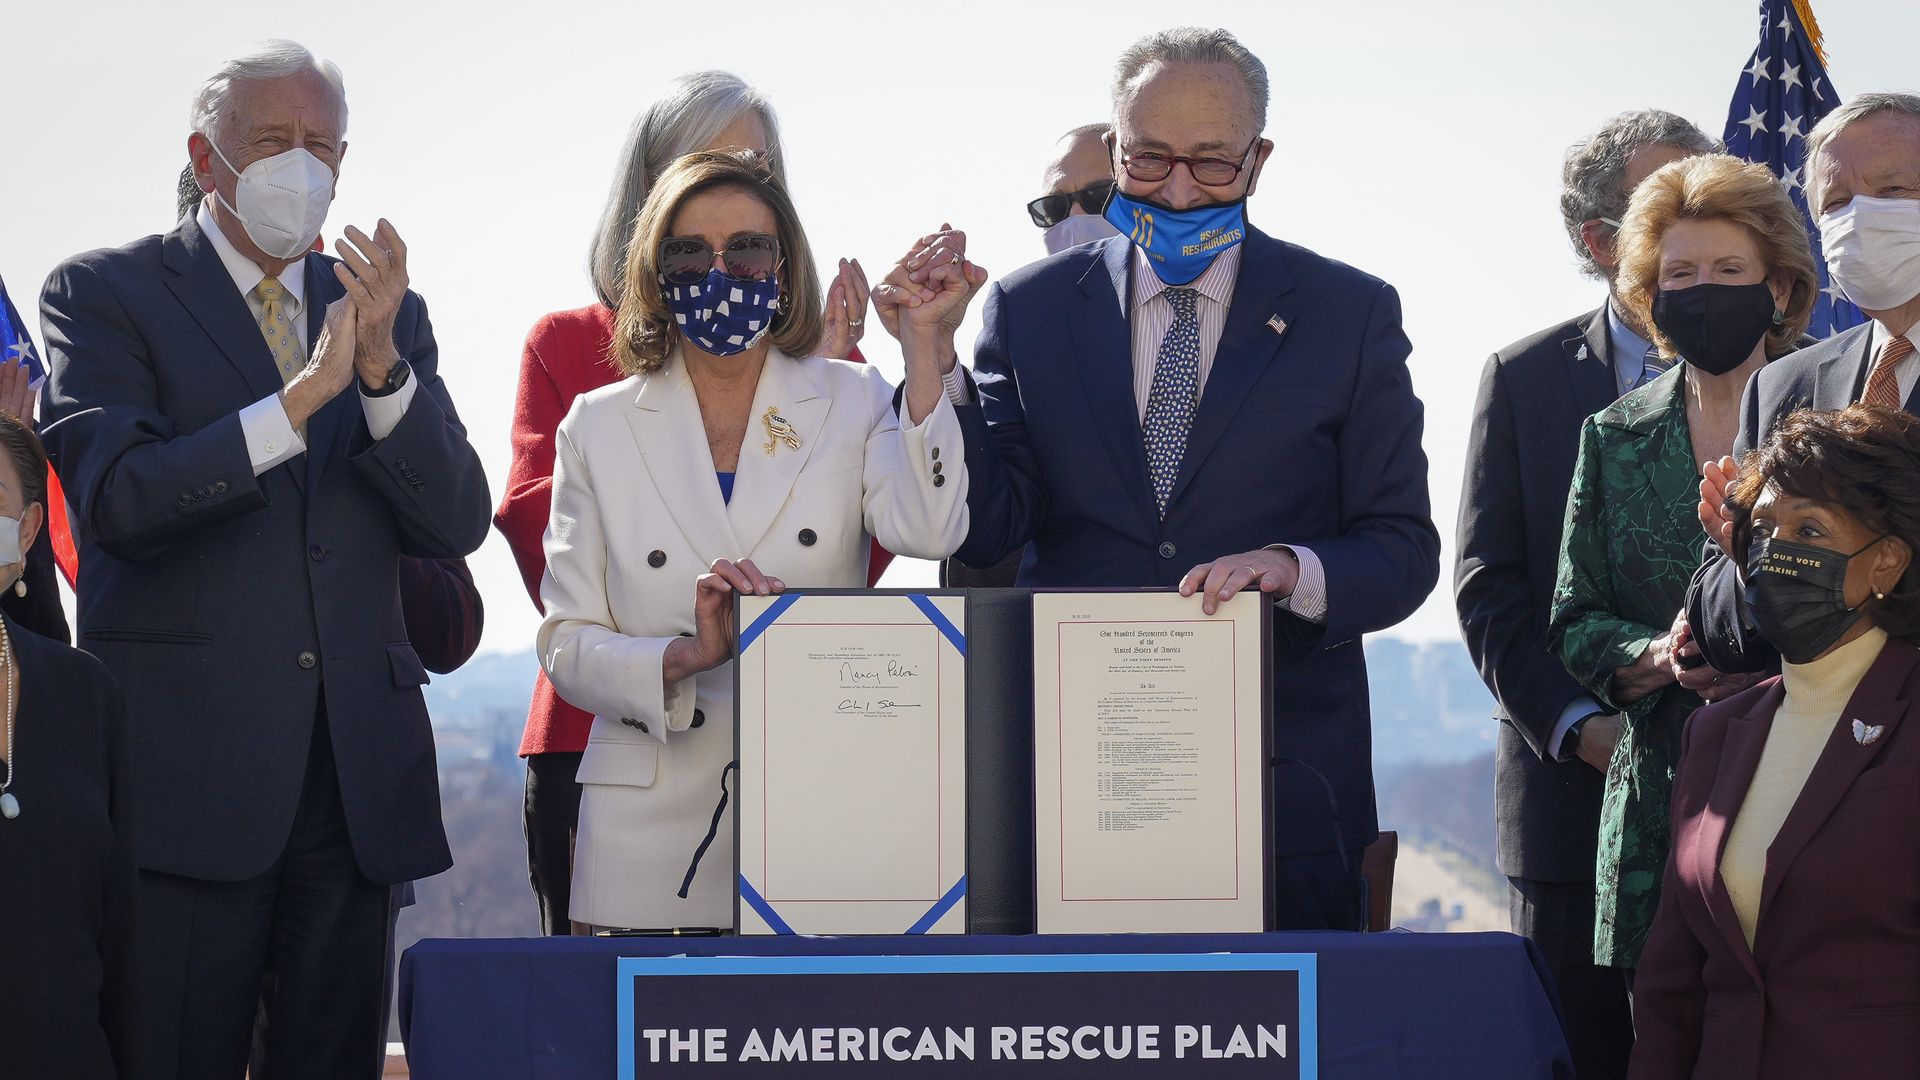 House Speaker Nancy Pelosi and Senate Majority Leader Chuck Schumer are seen celebrating after passing the COVID-19 relief law.